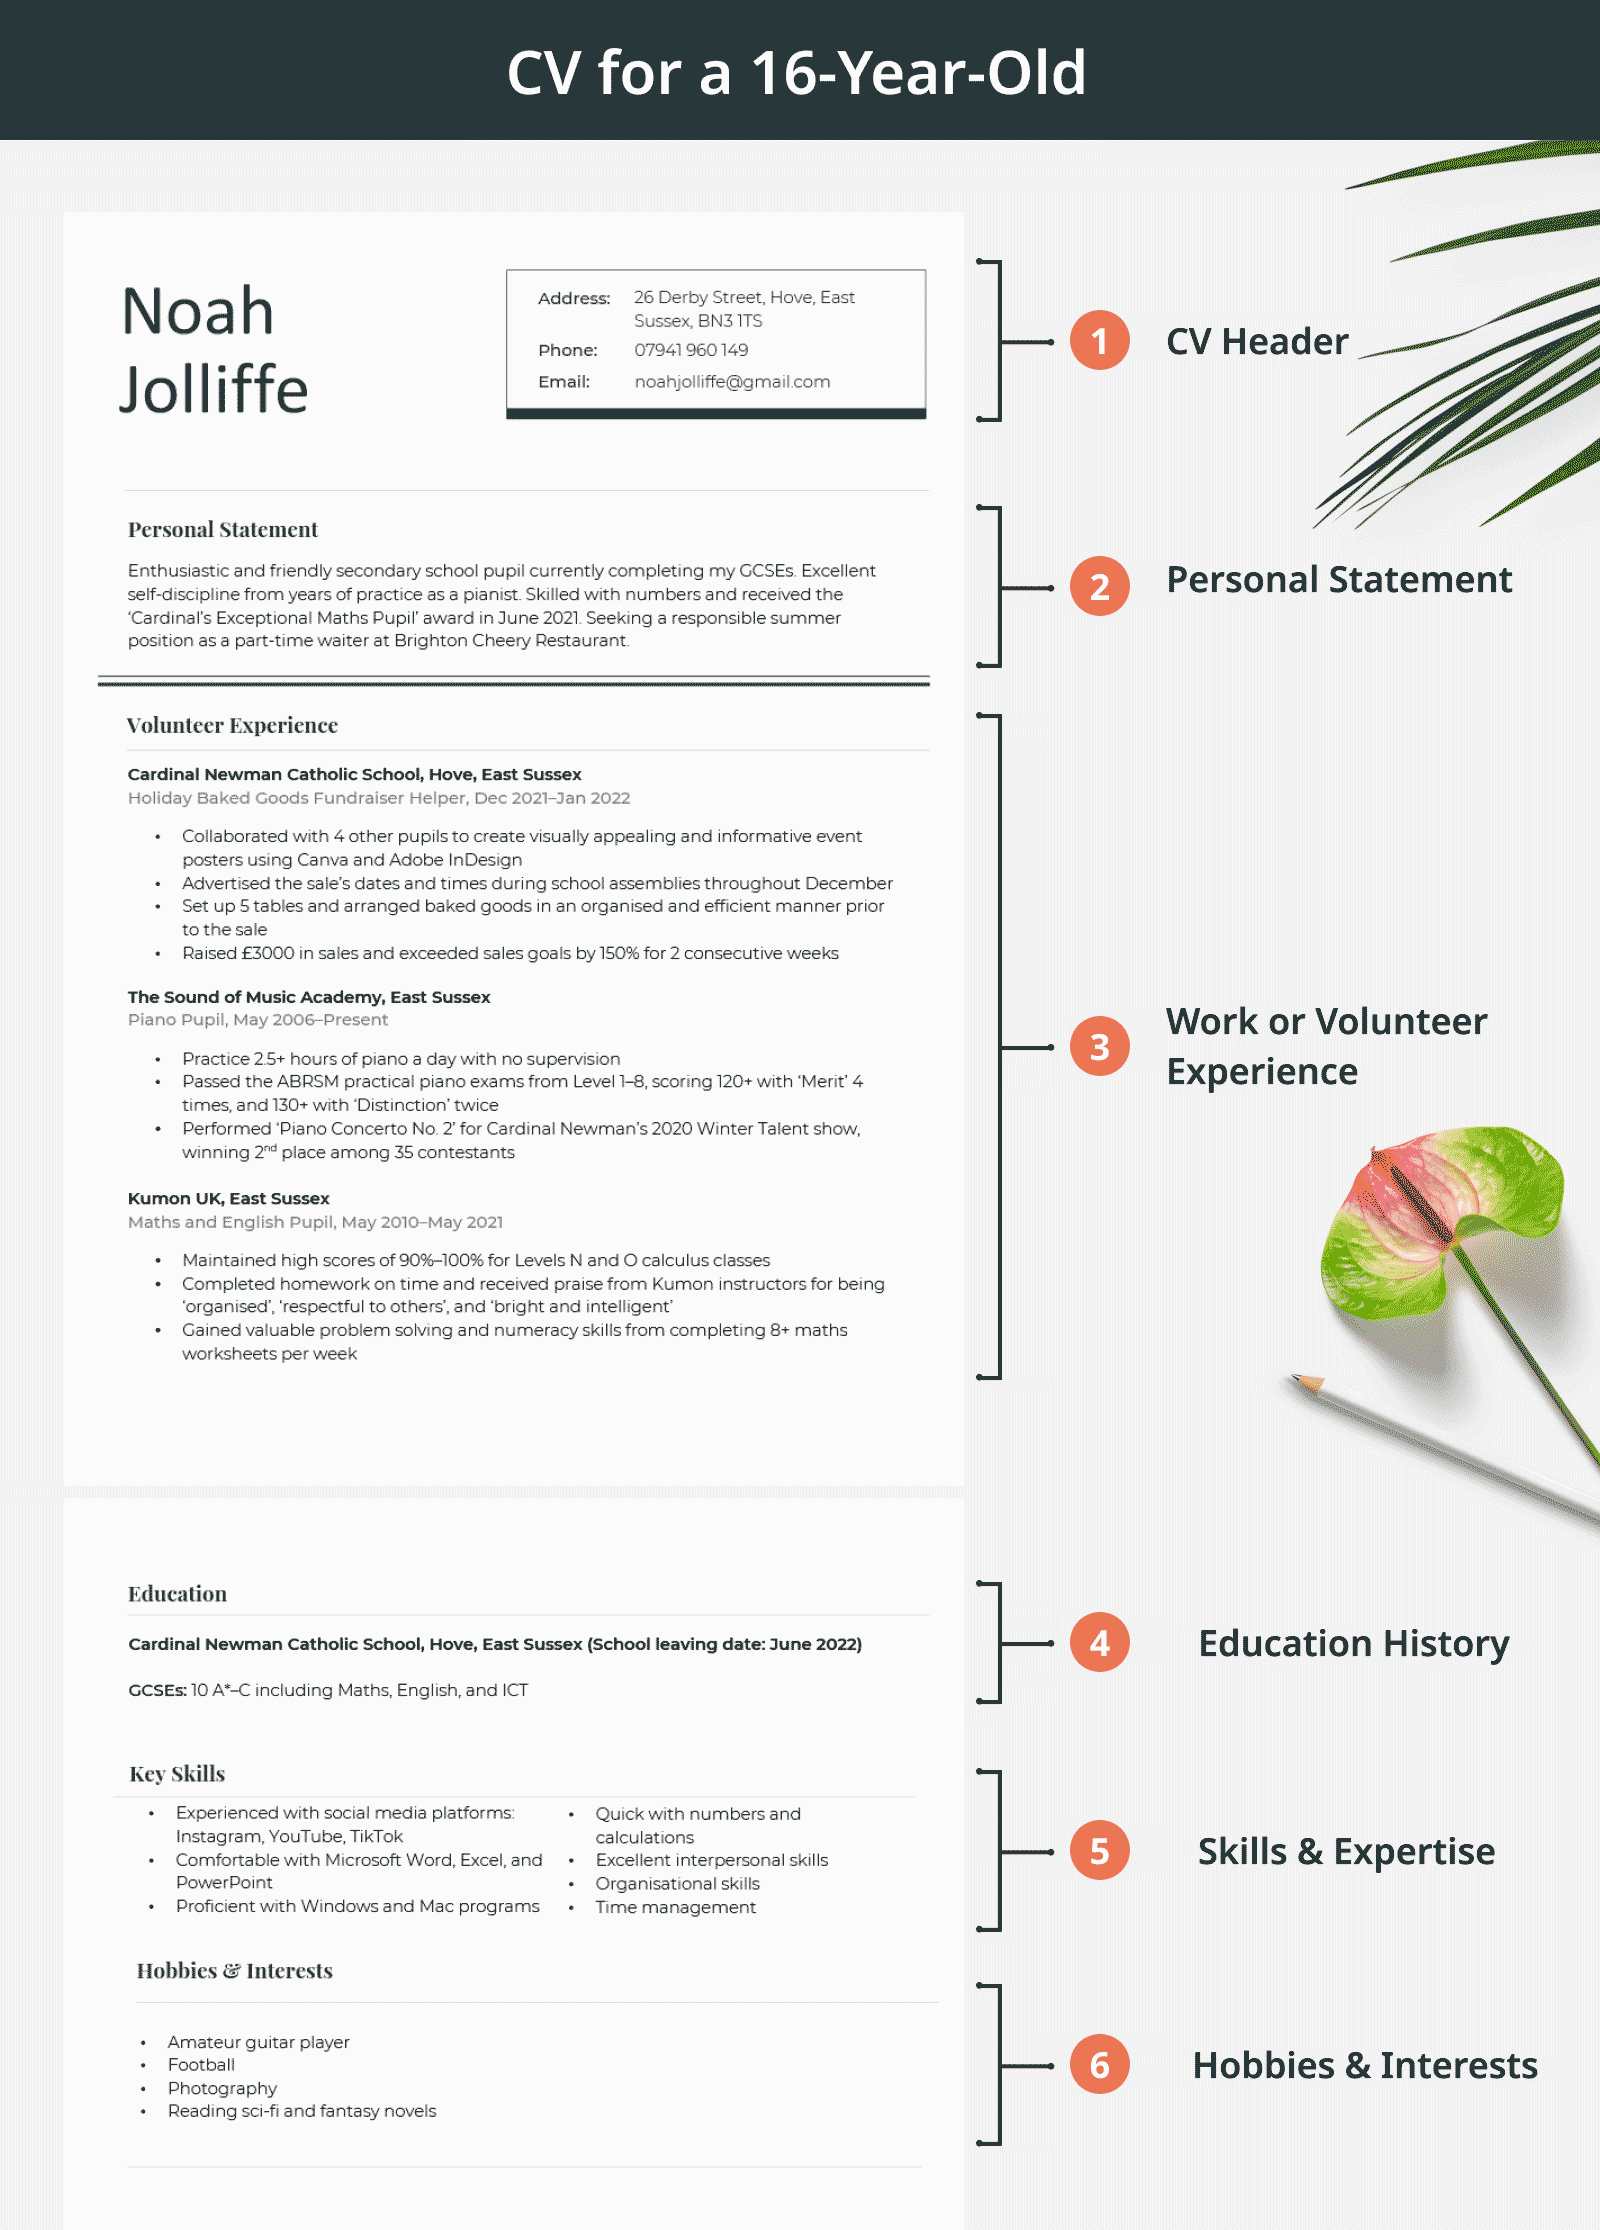 How to lay out your CV for a 16 year old, as shown in an infographic that contains a blooming flower in the background.